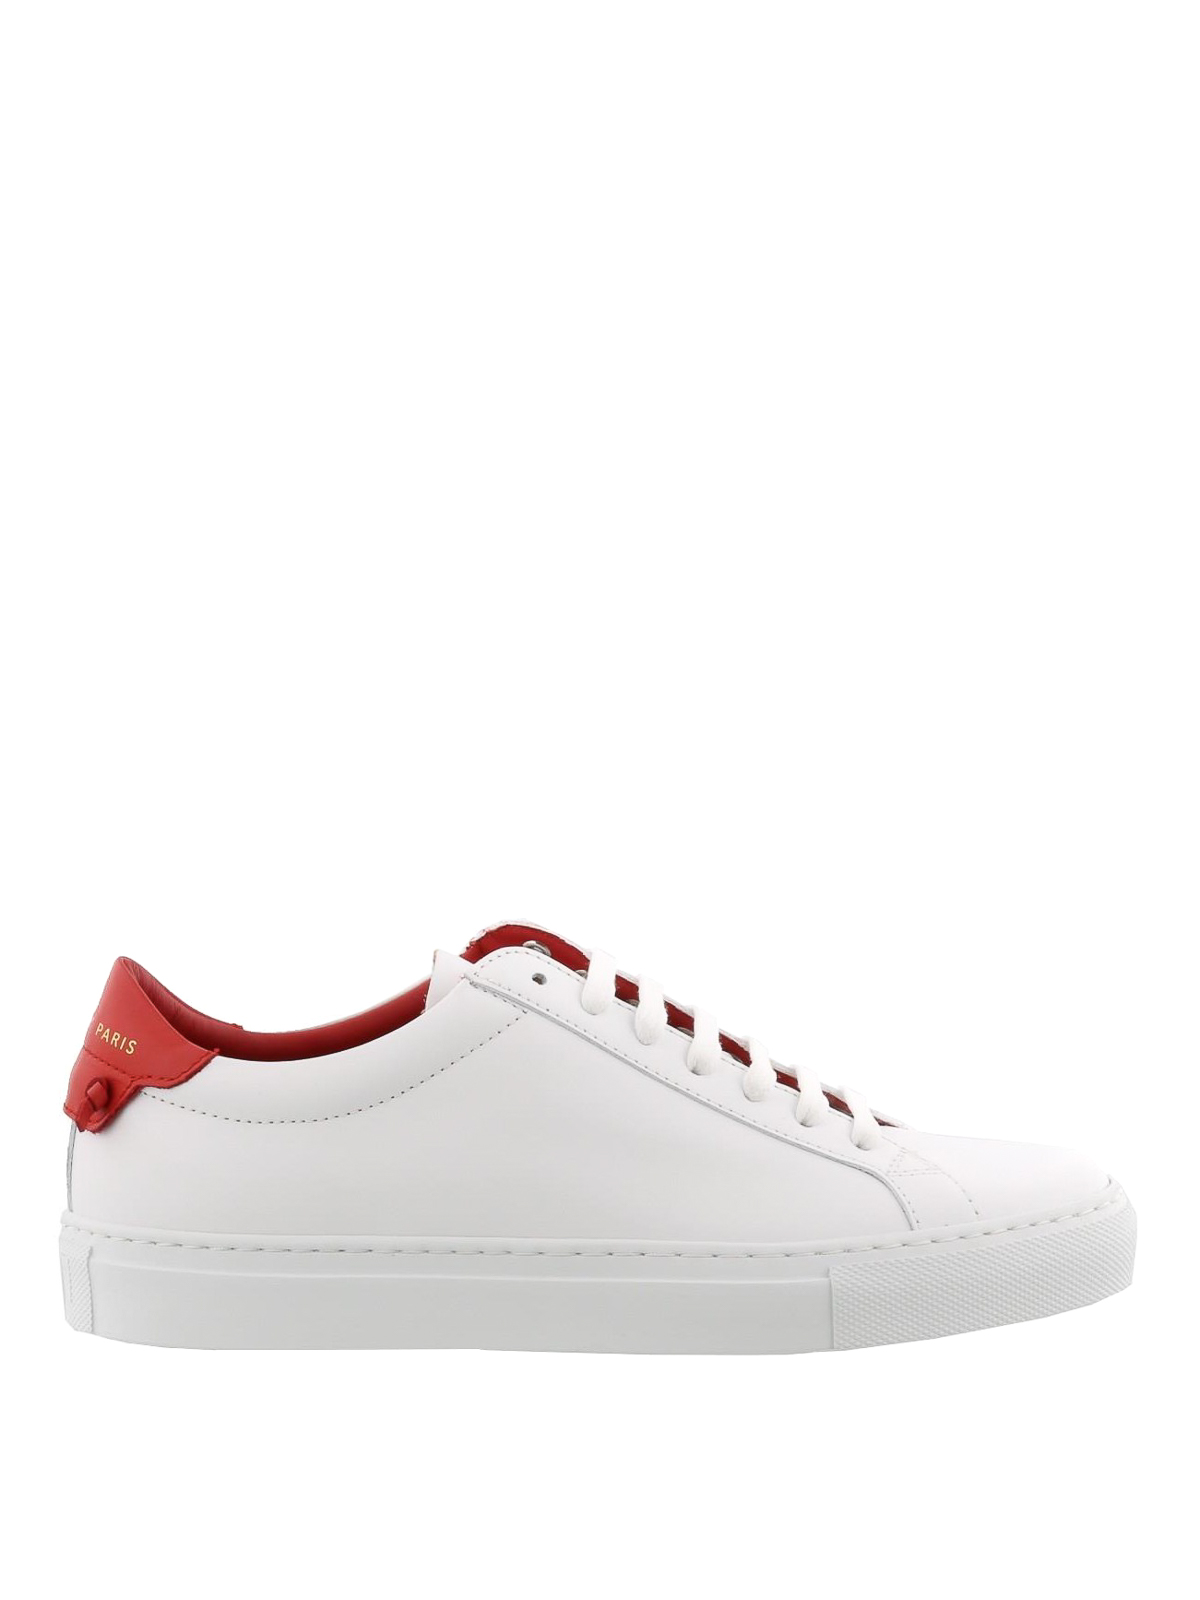 Givenchy - Sneaker Urban Street bianche e rosse - sneakers - BE0003E01W112